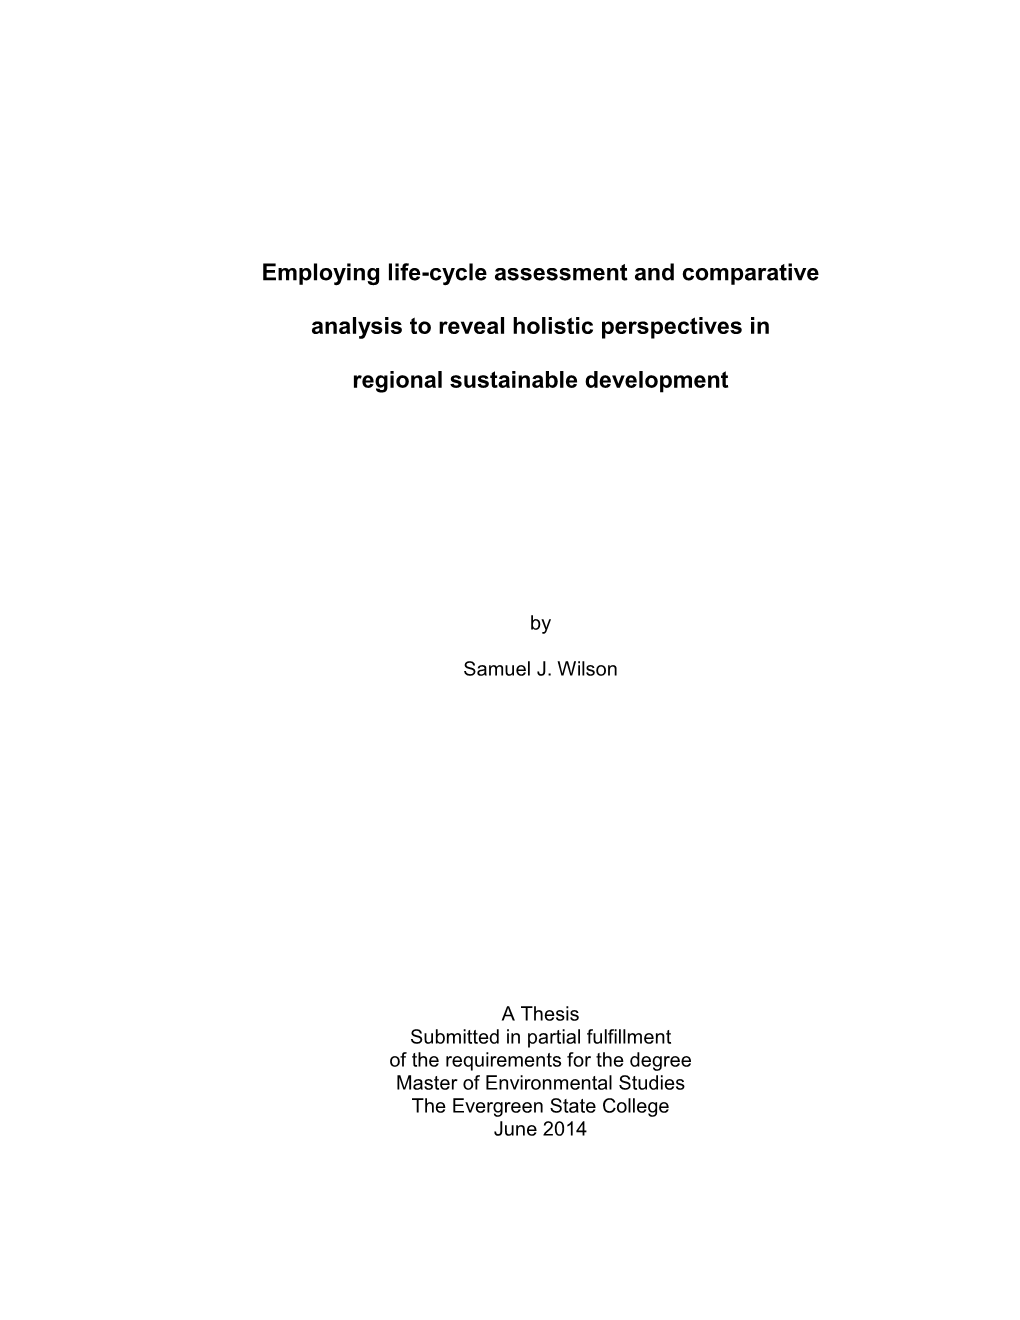 Employing Life-Cycle Assessment and Comparative Analysis to Reveal Holistic Perspectives in Regional Sustainable Development